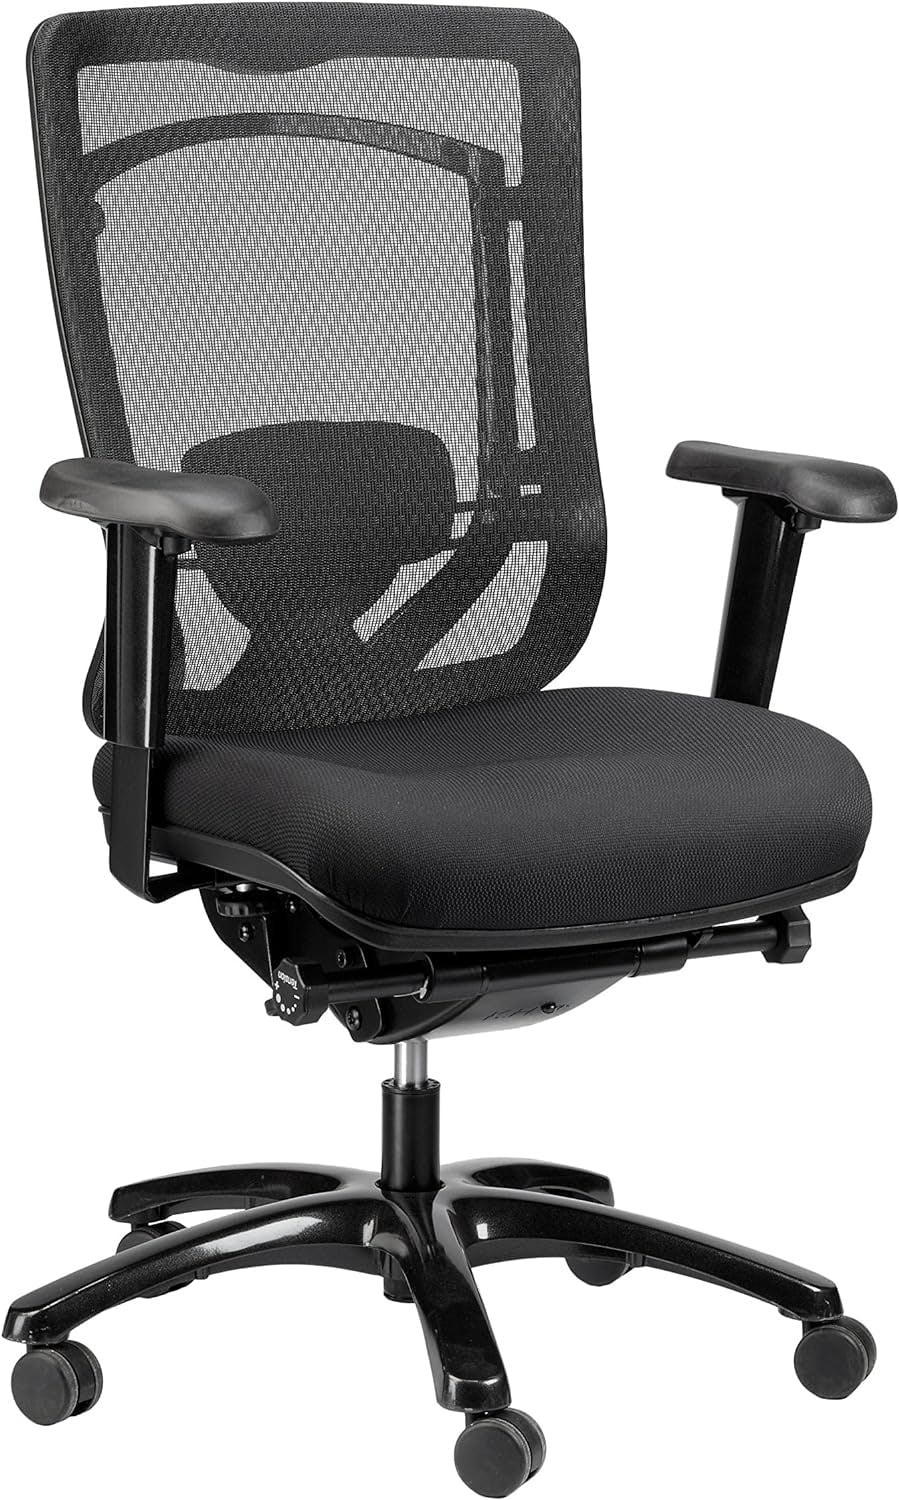 Monterey High Back Executive Mesh & Leather Chair, Black